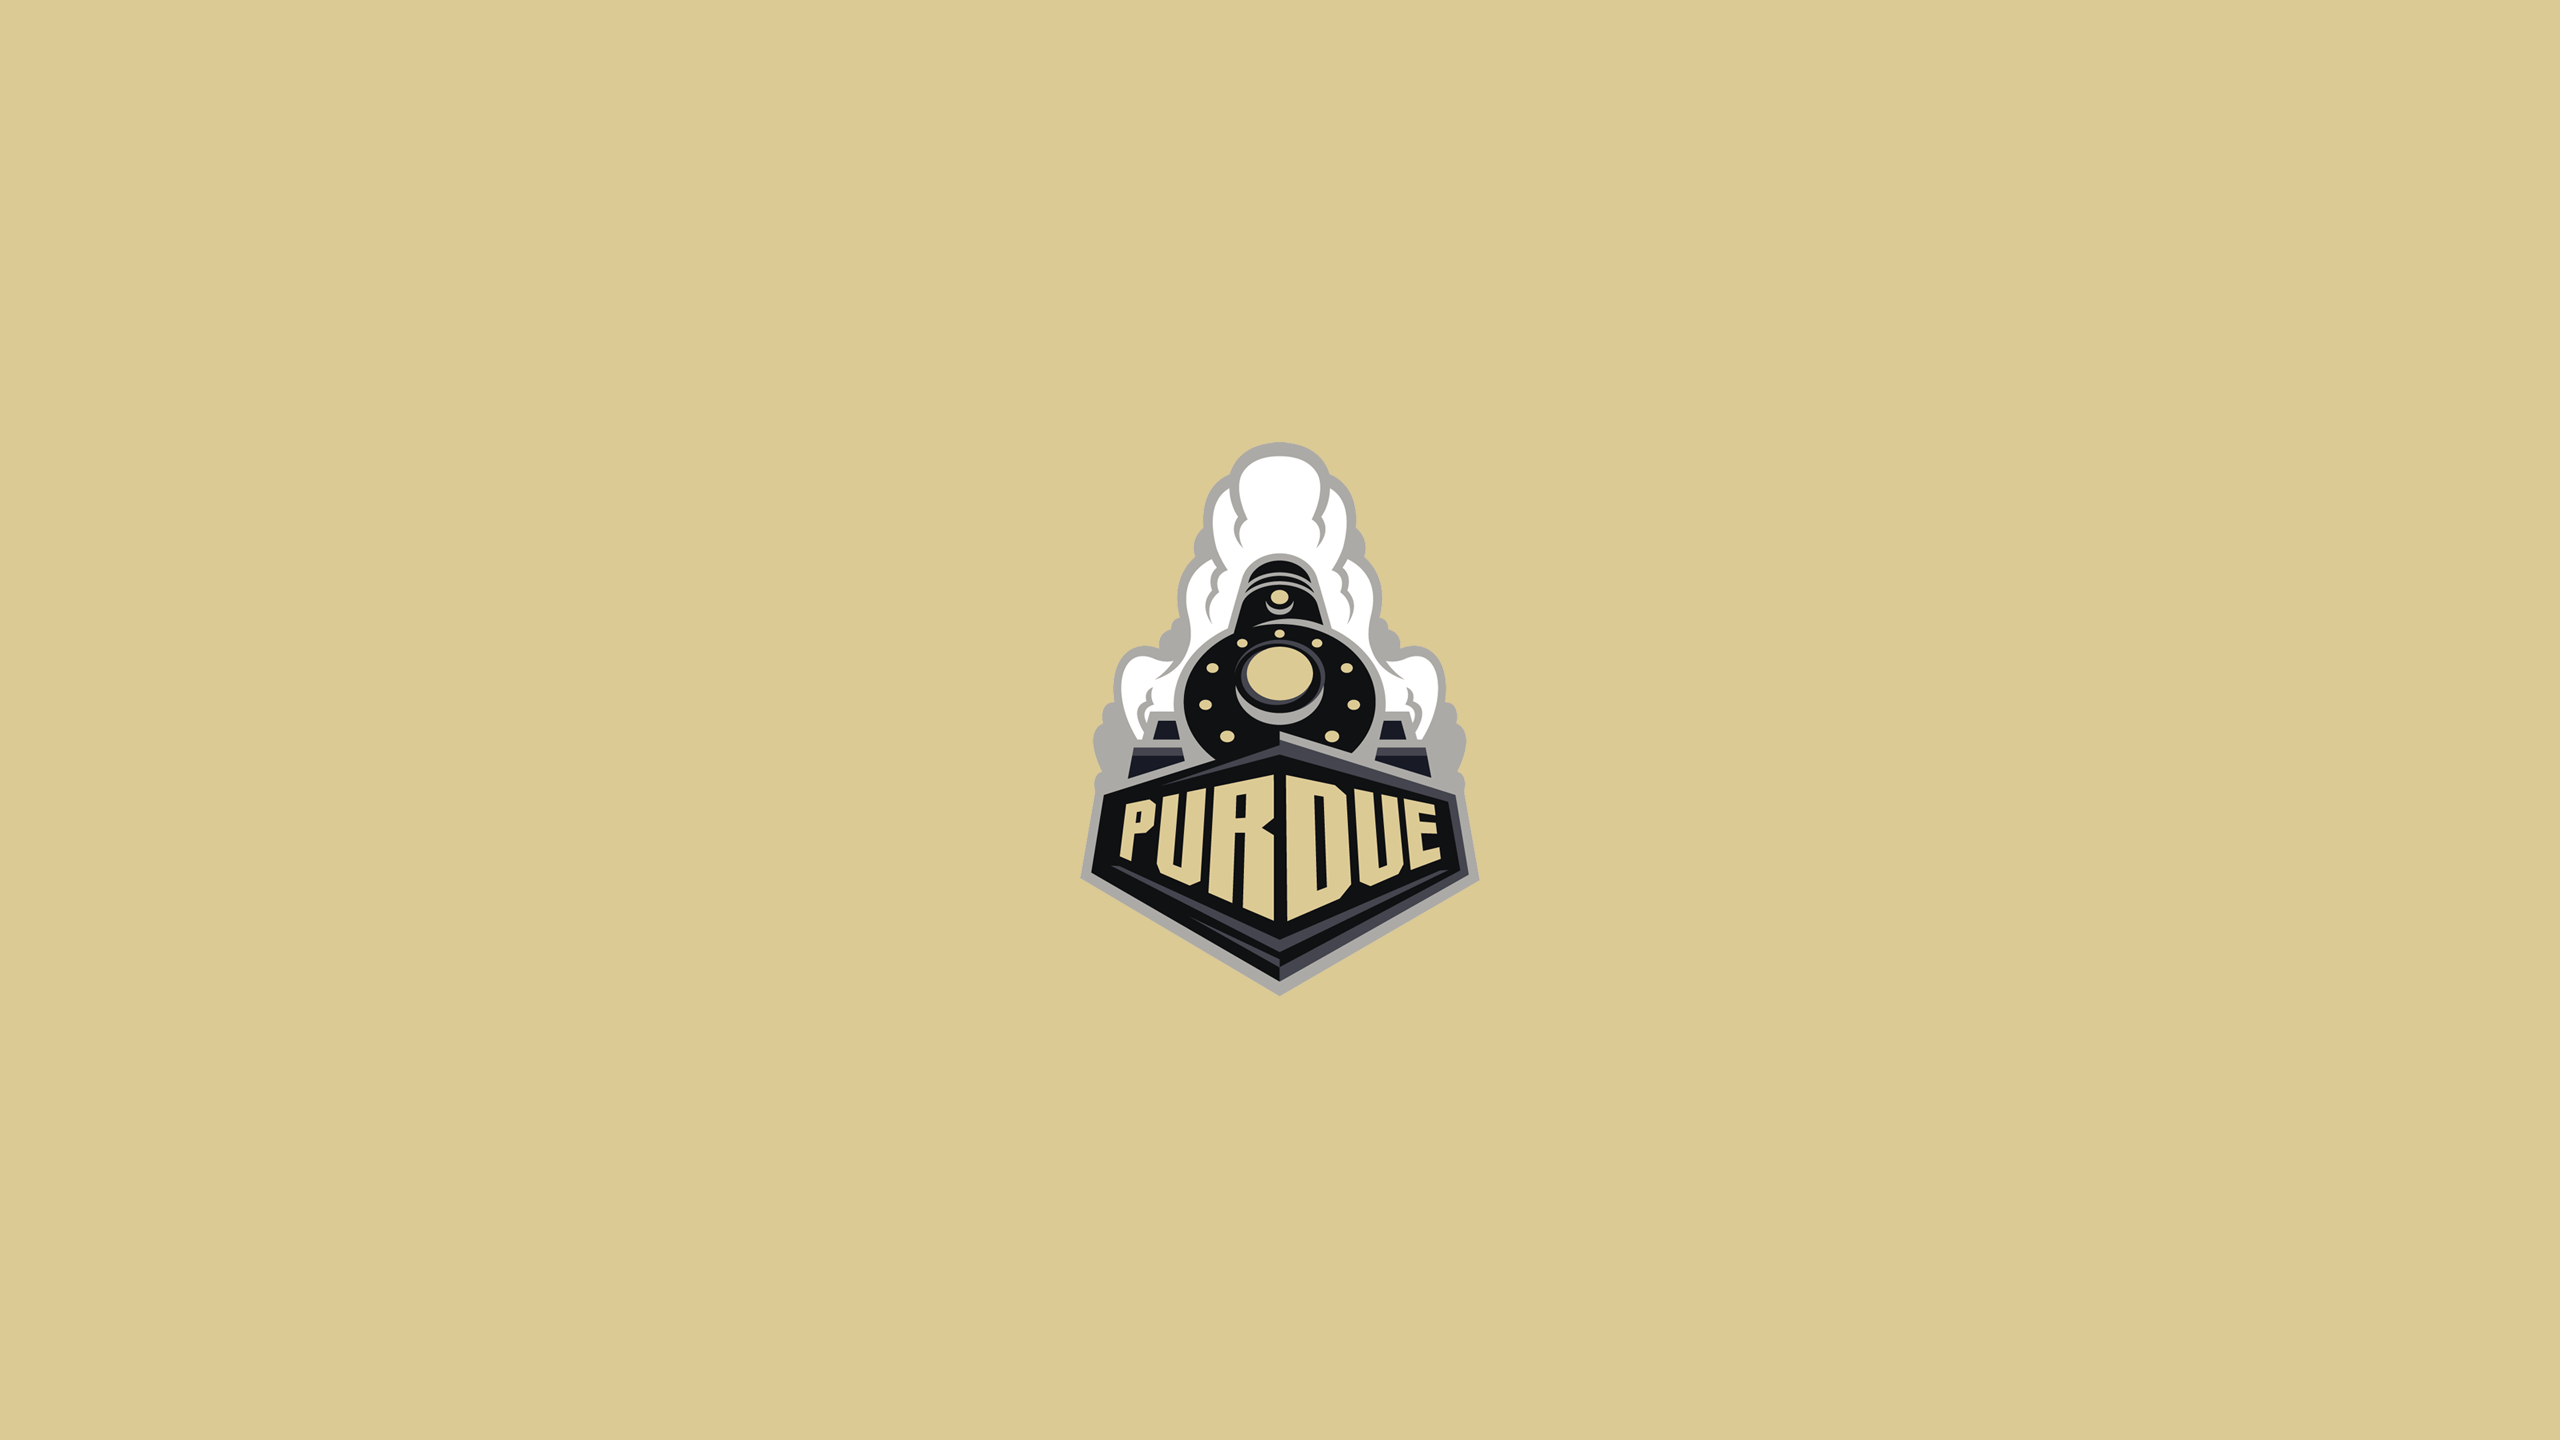 Purdue Boilermakers Football - NCAAF - Square Bettor